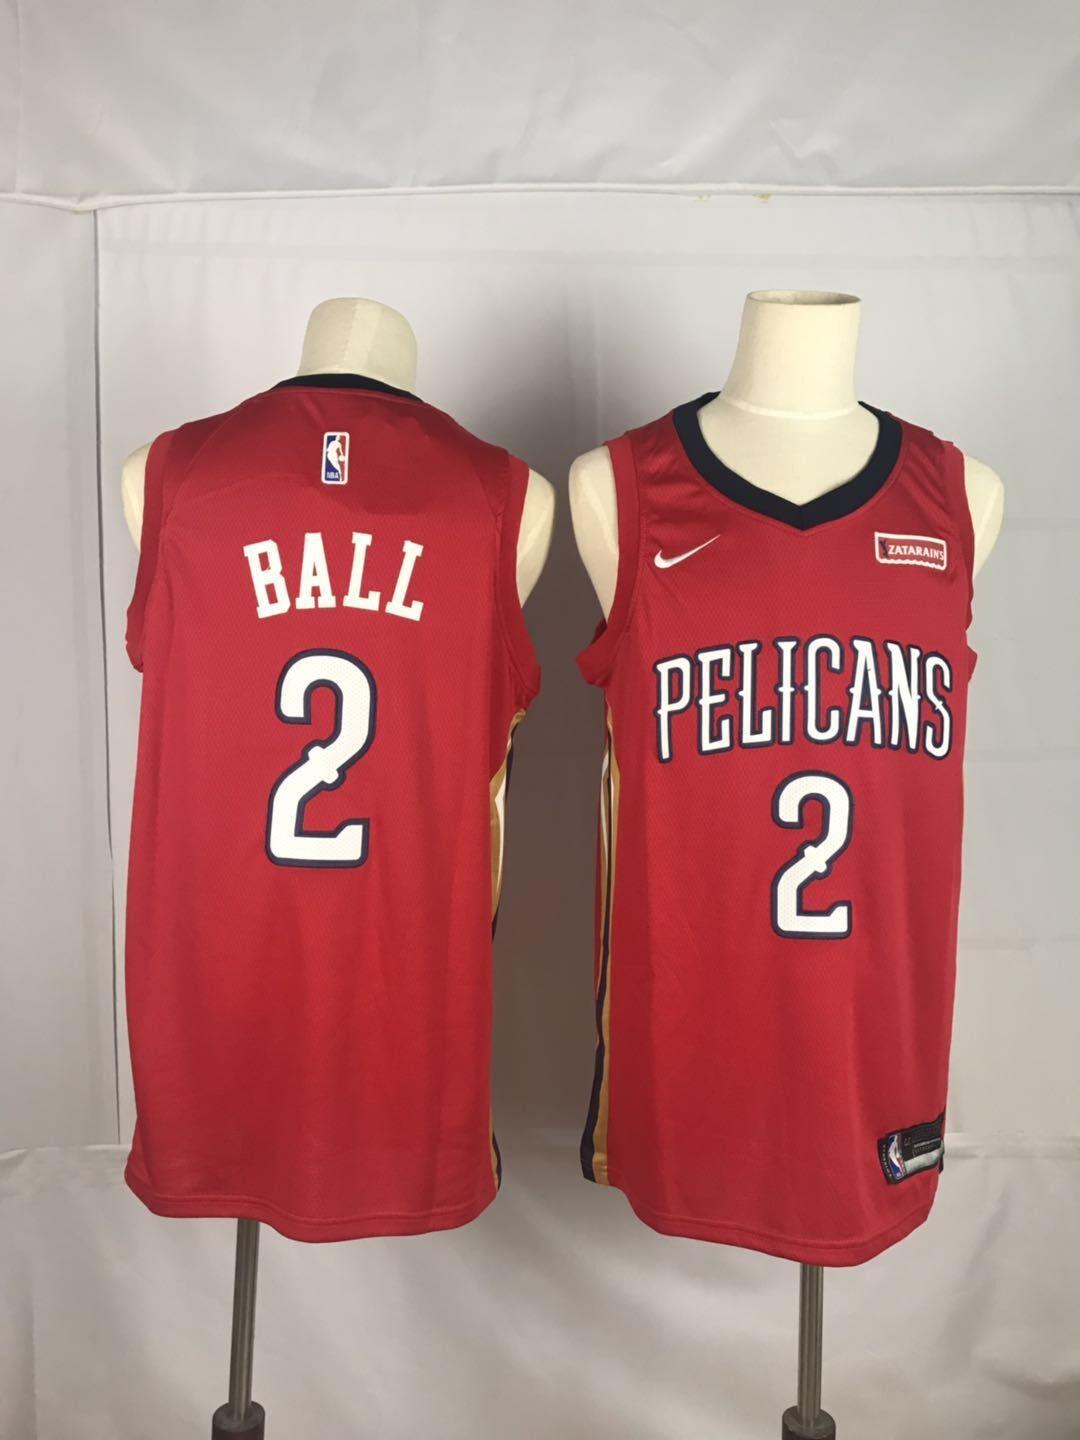 Men New Orleans Pelicans #2 Ball Red Game Nike NBA Jerseys->new orleans pelicans->NBA Jersey